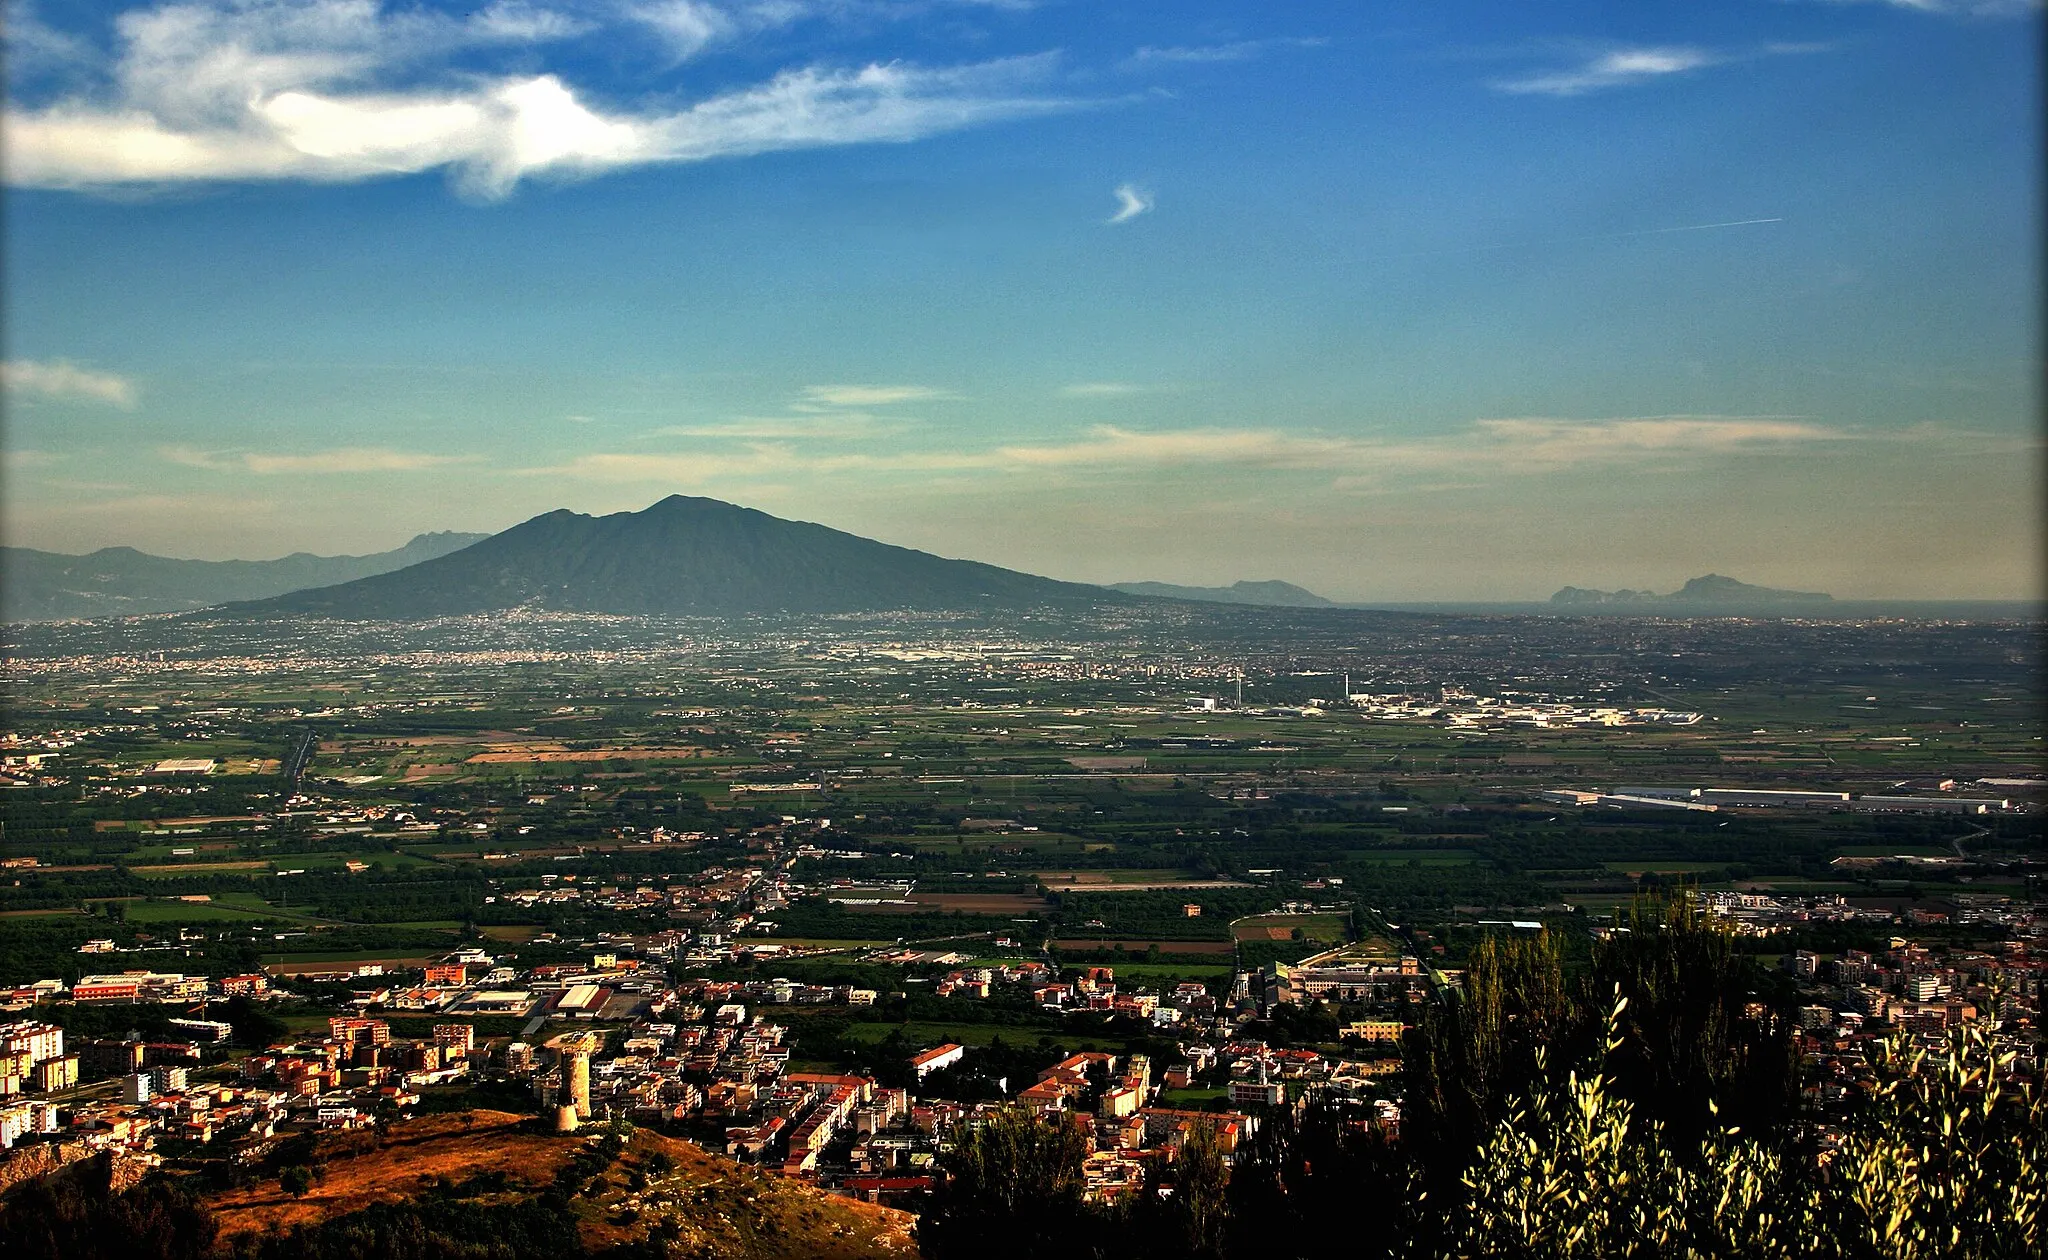 Photo showing: Viewpoint of Mount Vesuvius and Capri island from a hill of Maddaloni. Maddaloni is visible in the foreground.